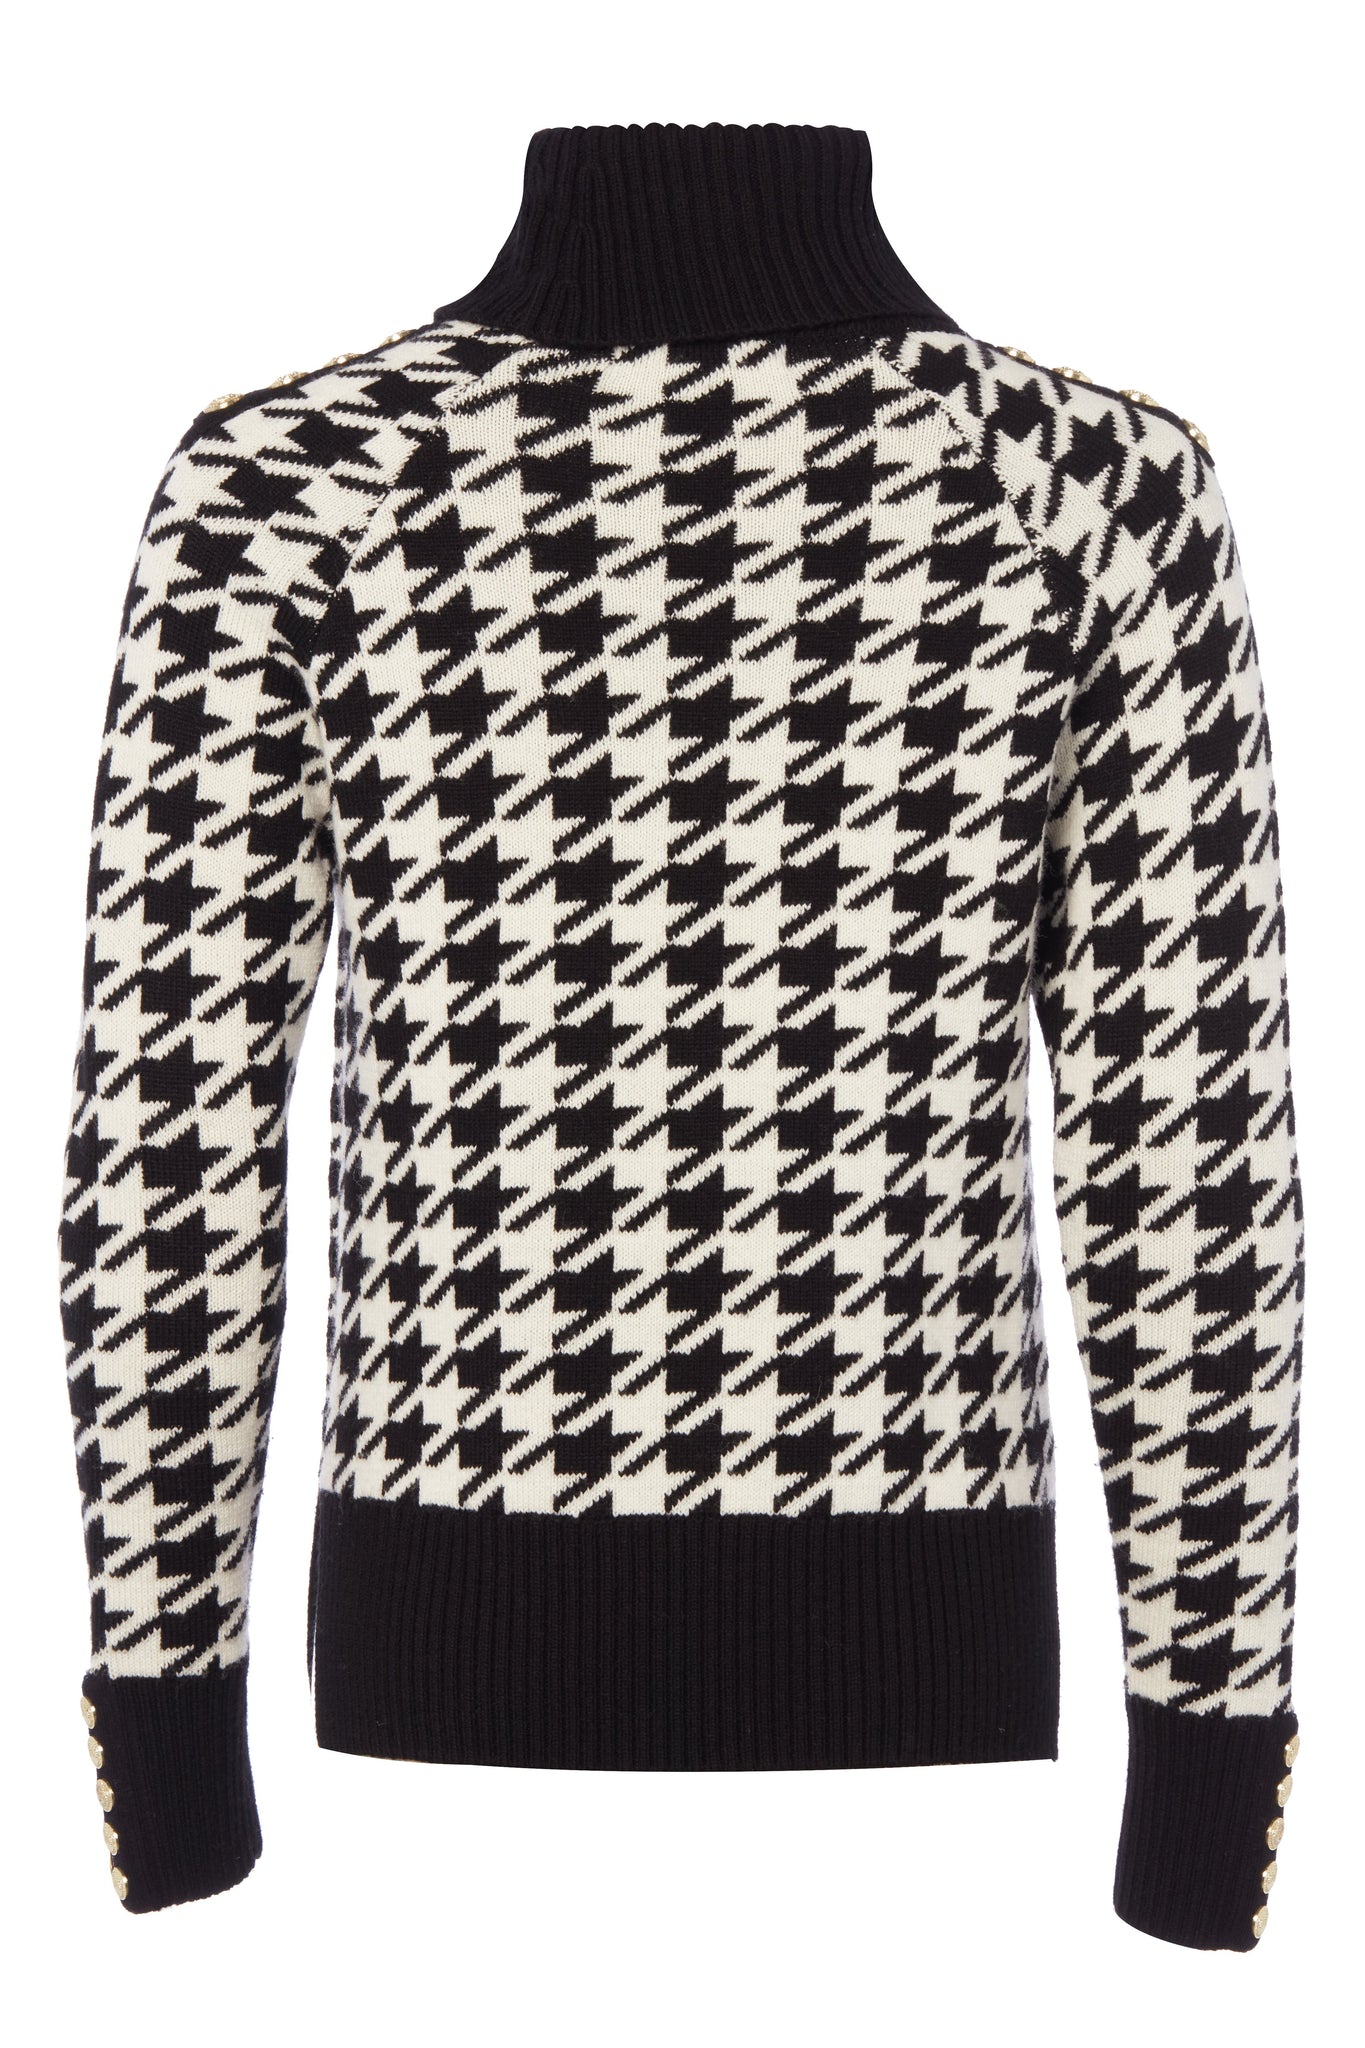 back of a classic black and white houndstooth jumper with contrast black cuffs, roll neck and split ribbed hem with gold button detail on the cuffs and collar